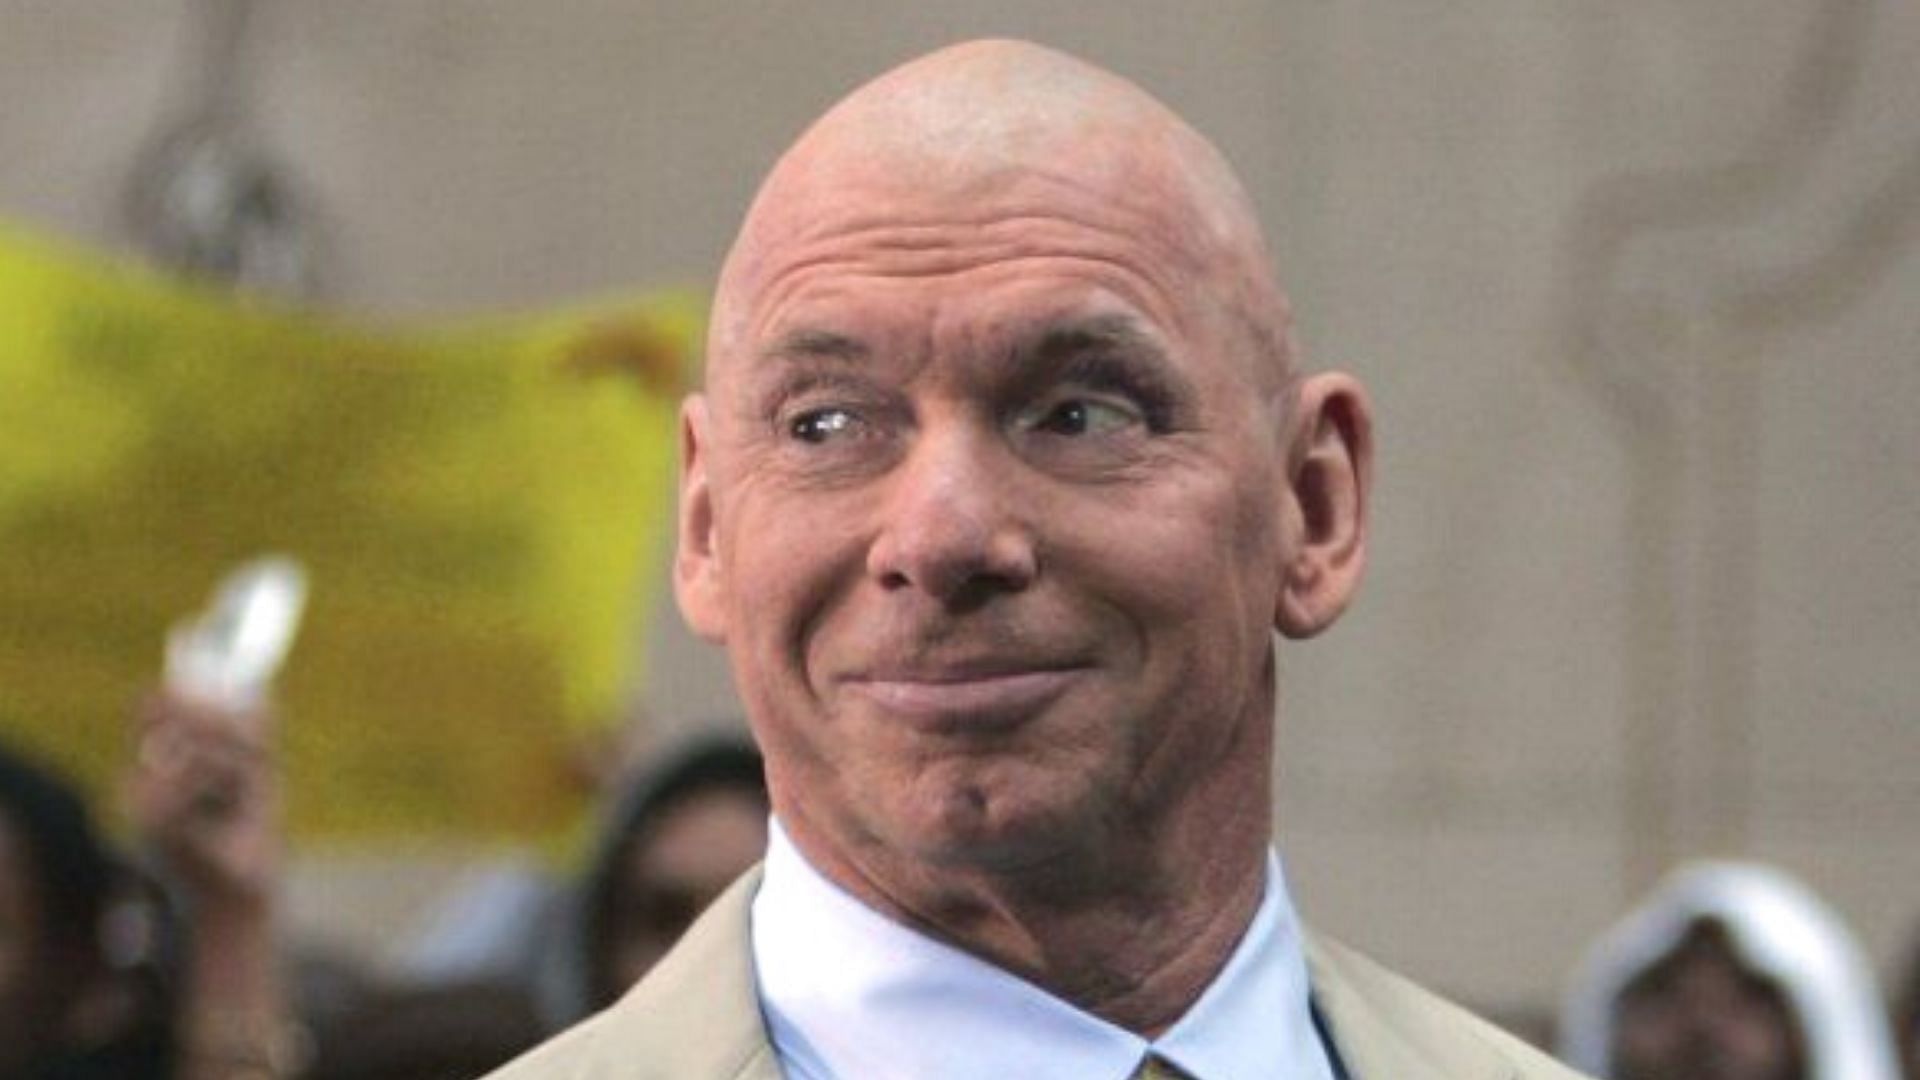 Vince McMahon has himself gone bald during a WWE storyline